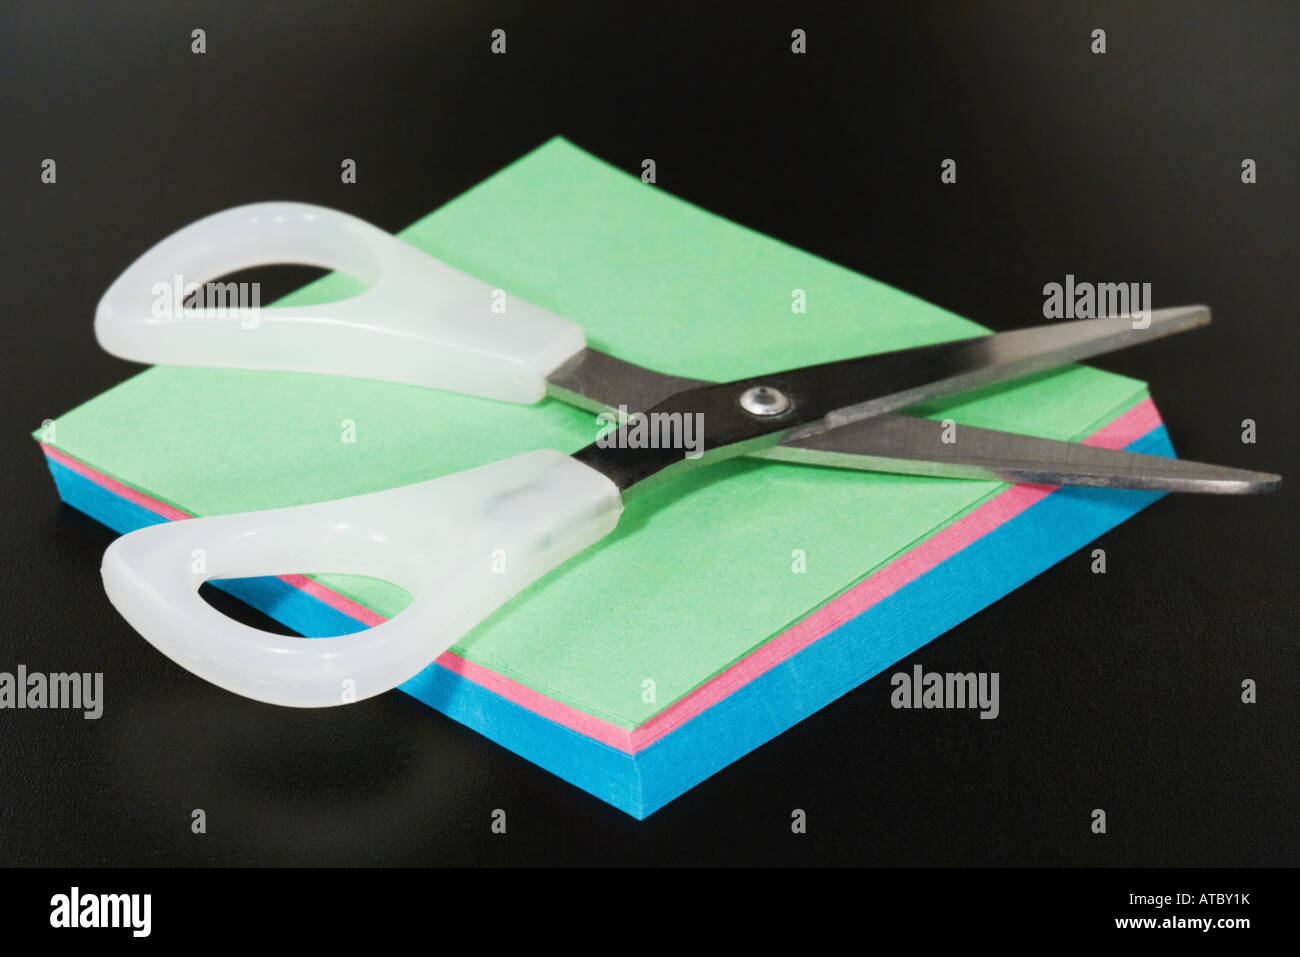 Scissors resting on blank paper, close-up Stock Photo